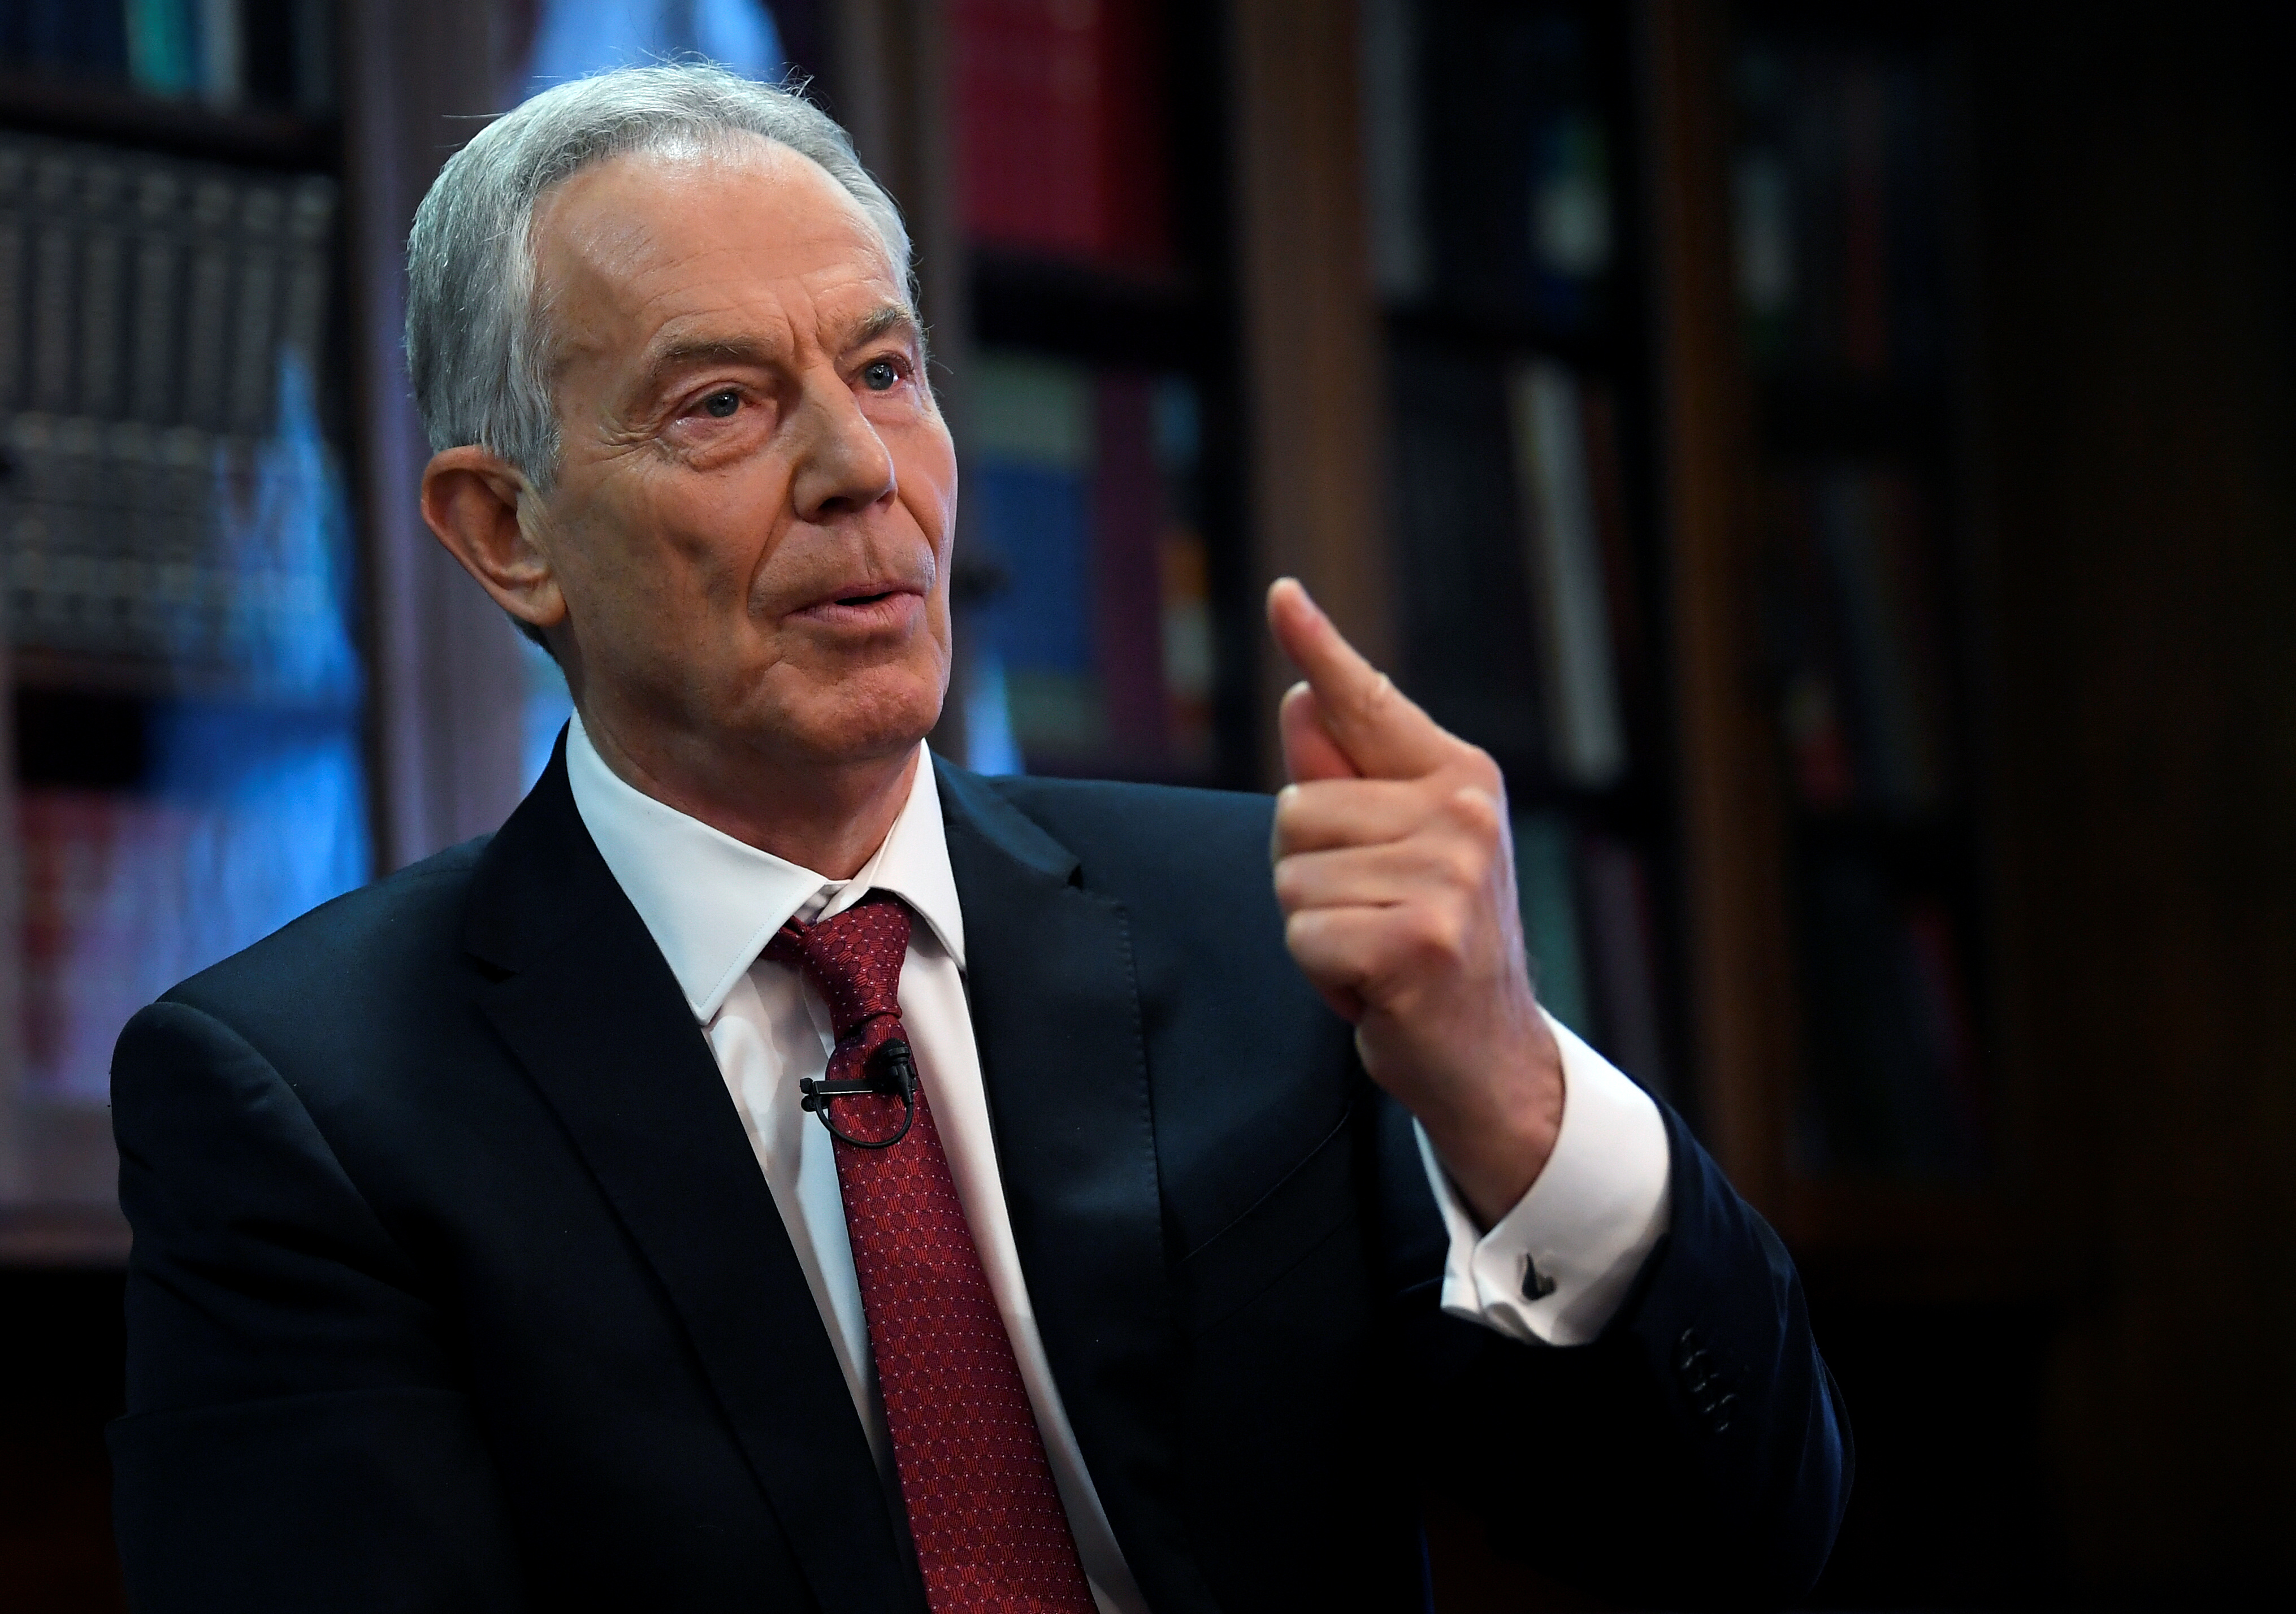 Former British Prime Minister Tony Blair speaks at the Hallam Conference Centre in London